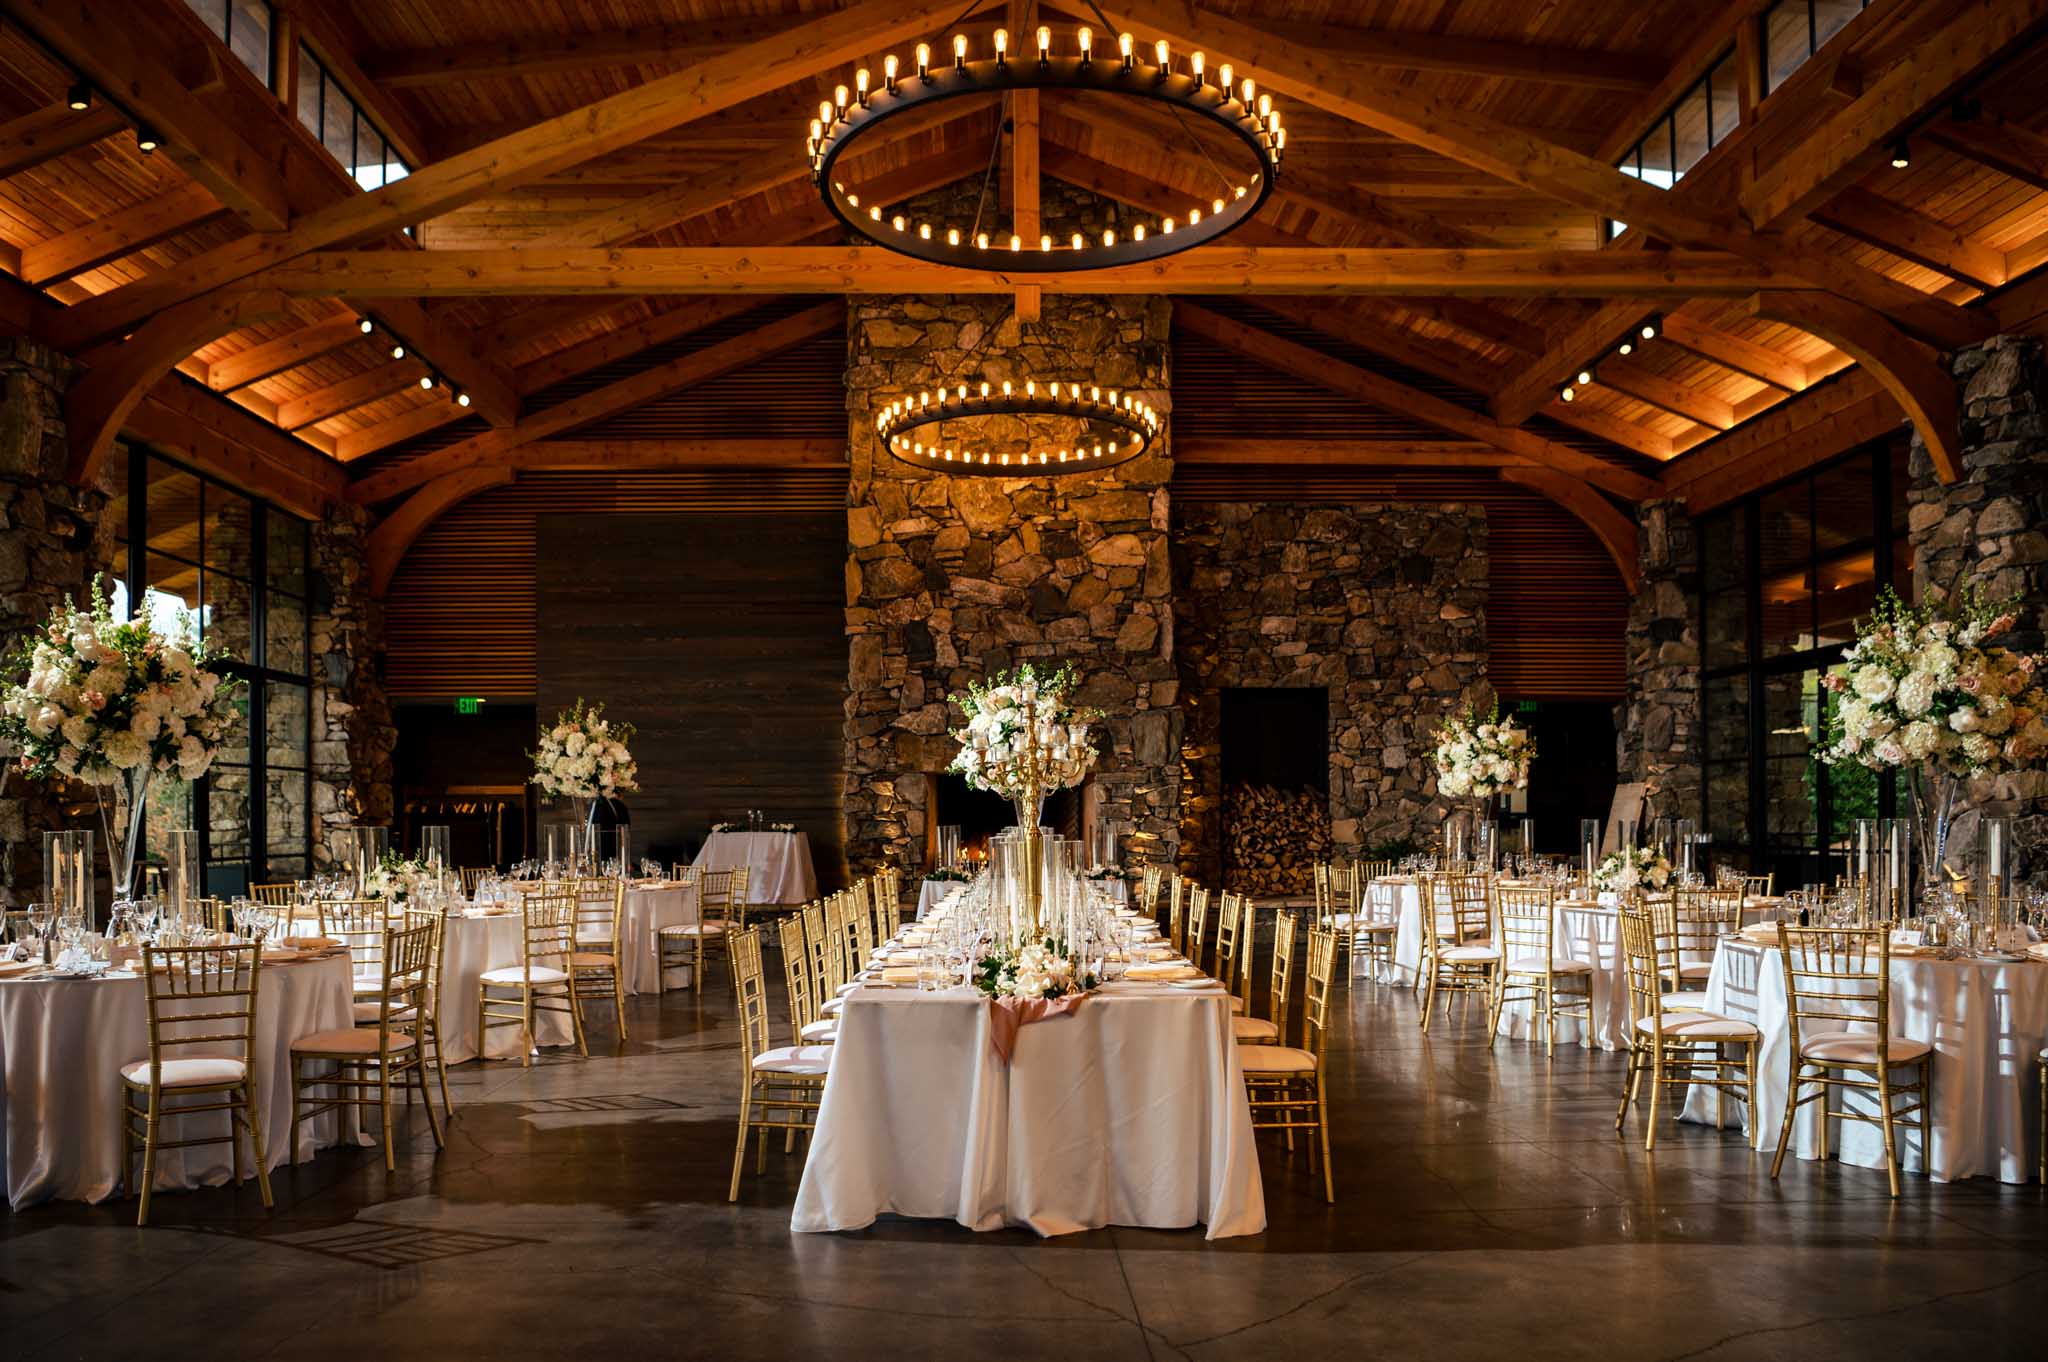 A wedding reception beautifully decorated in a log cabin.